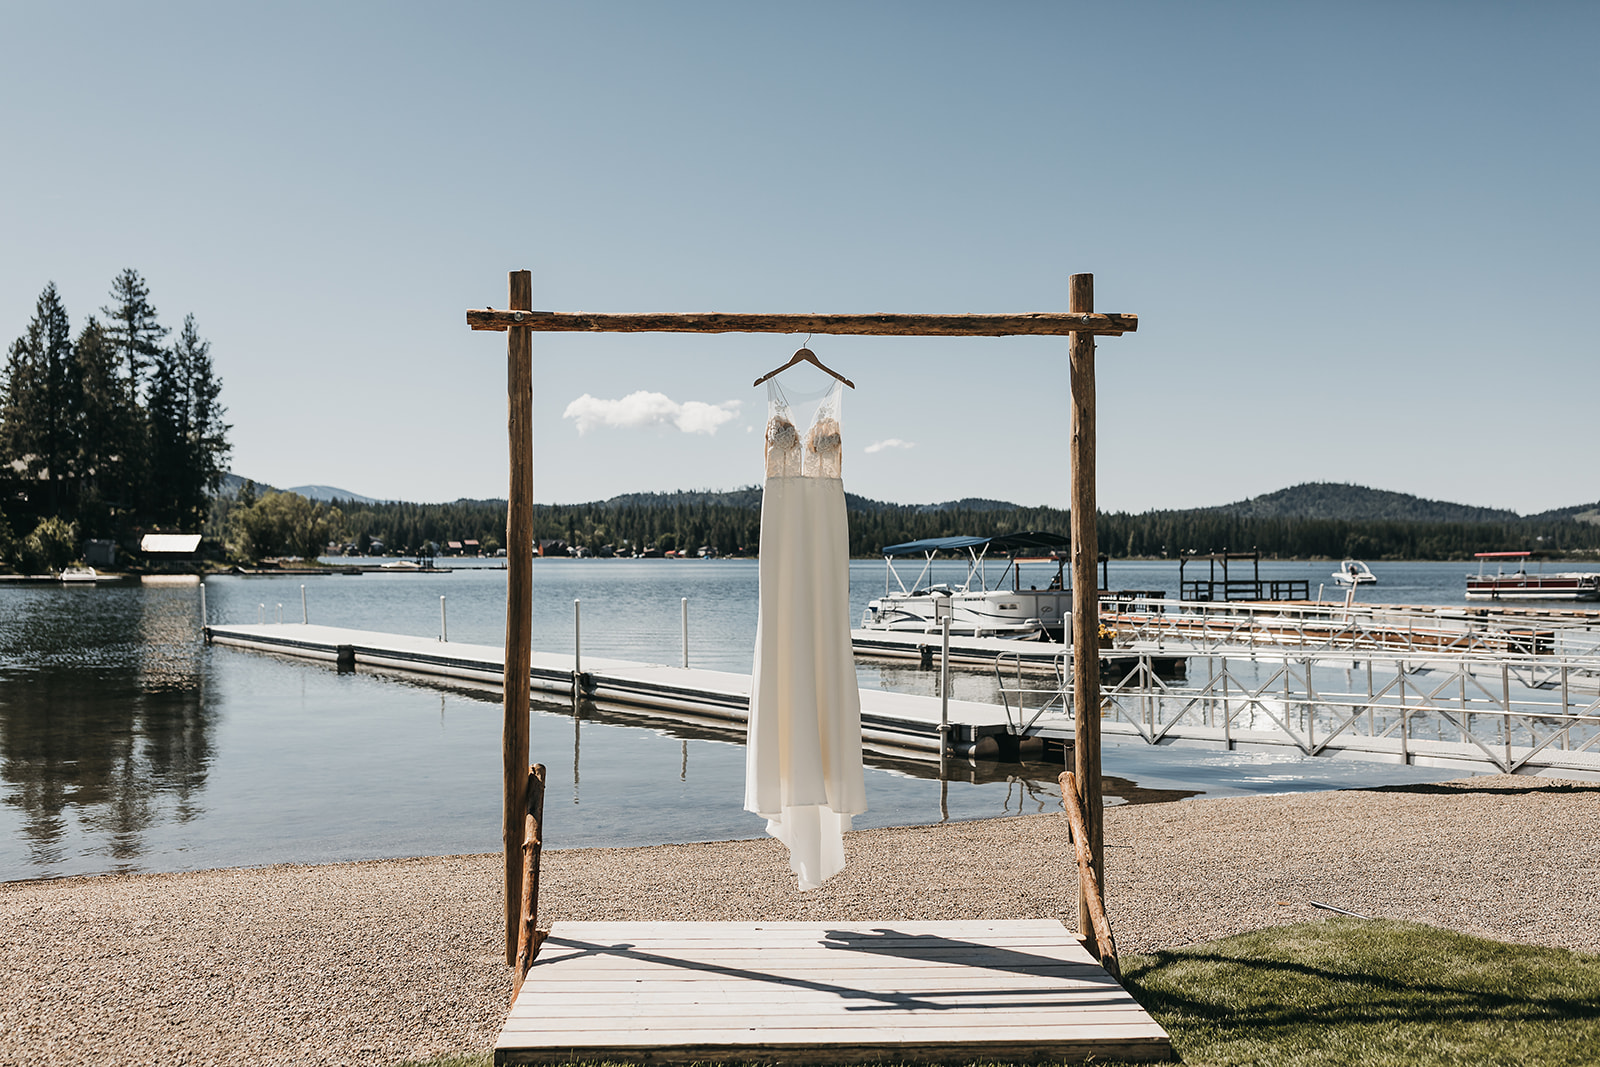 Bridal gown from Anna Kara hung under arch way for wedding ceremony. With private dock lake house views
